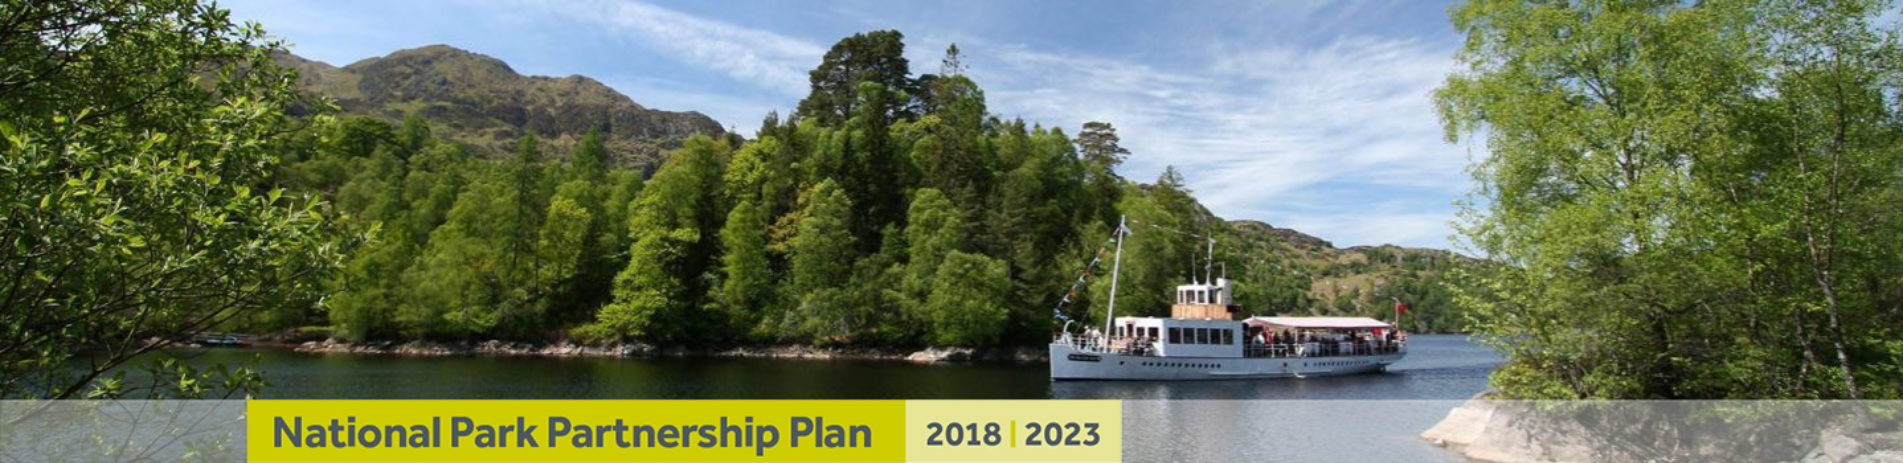 steampship-crossing-the-waters-of-loch-katrine-on-sunny-summer-day-with-text-banner-underneath-reading-national-park-partnership-plan-two-thousand-eighteen-two-thousand-twenty-three